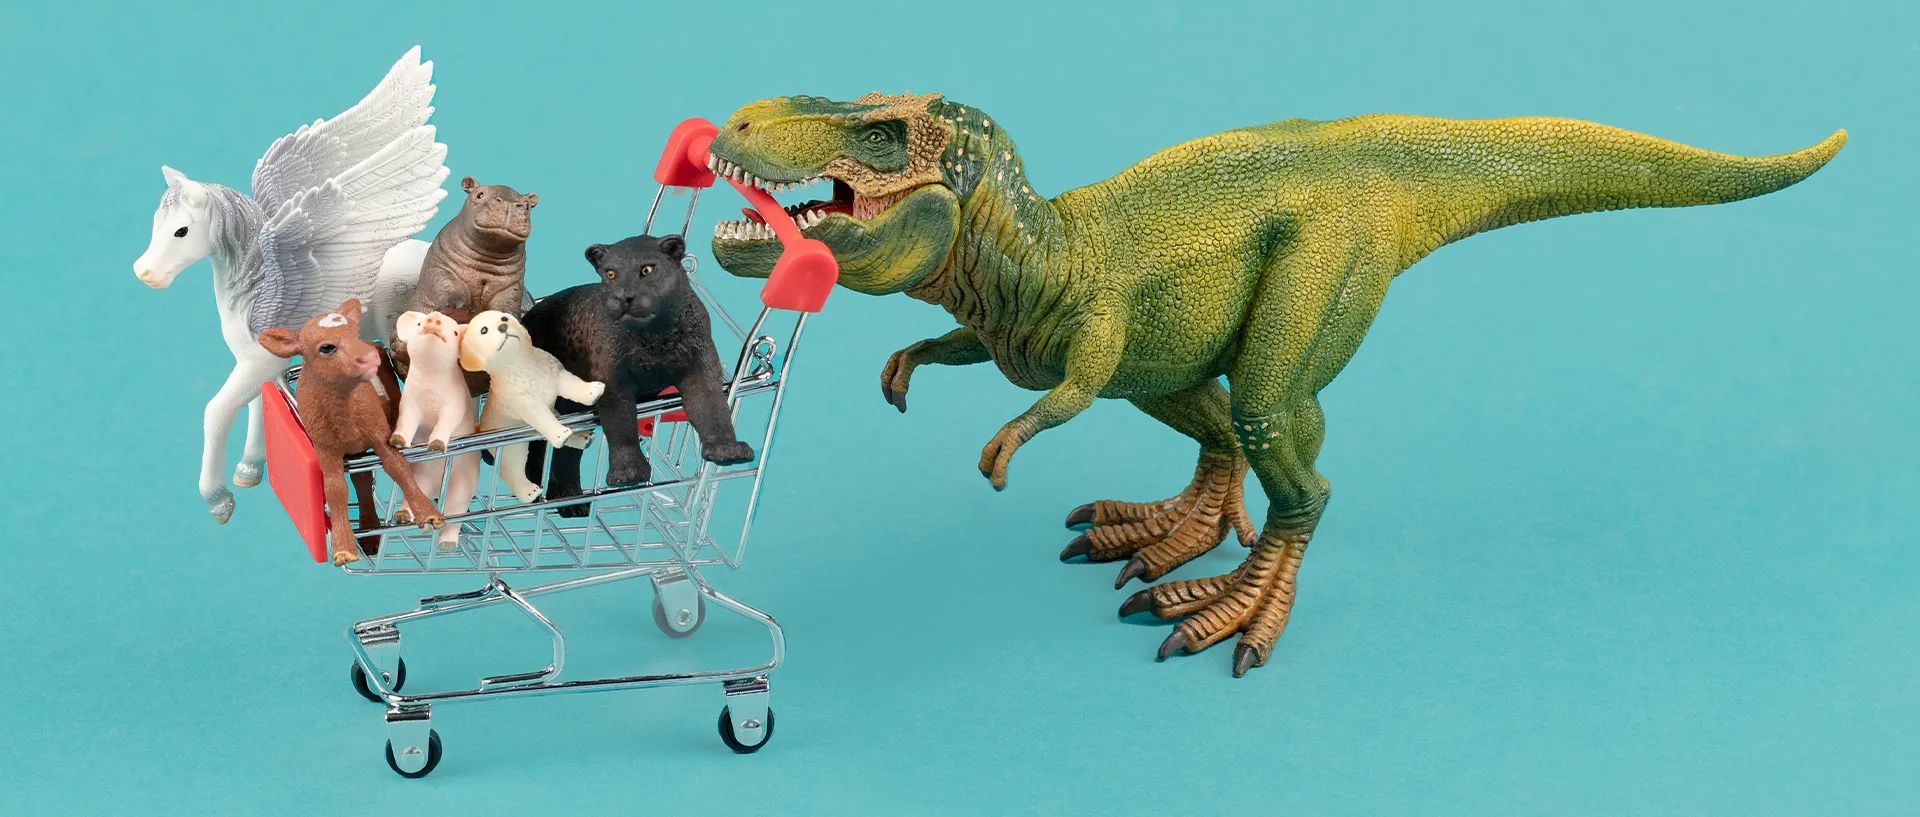 Savings up to 60% on toys! | Schleich USA Inc.